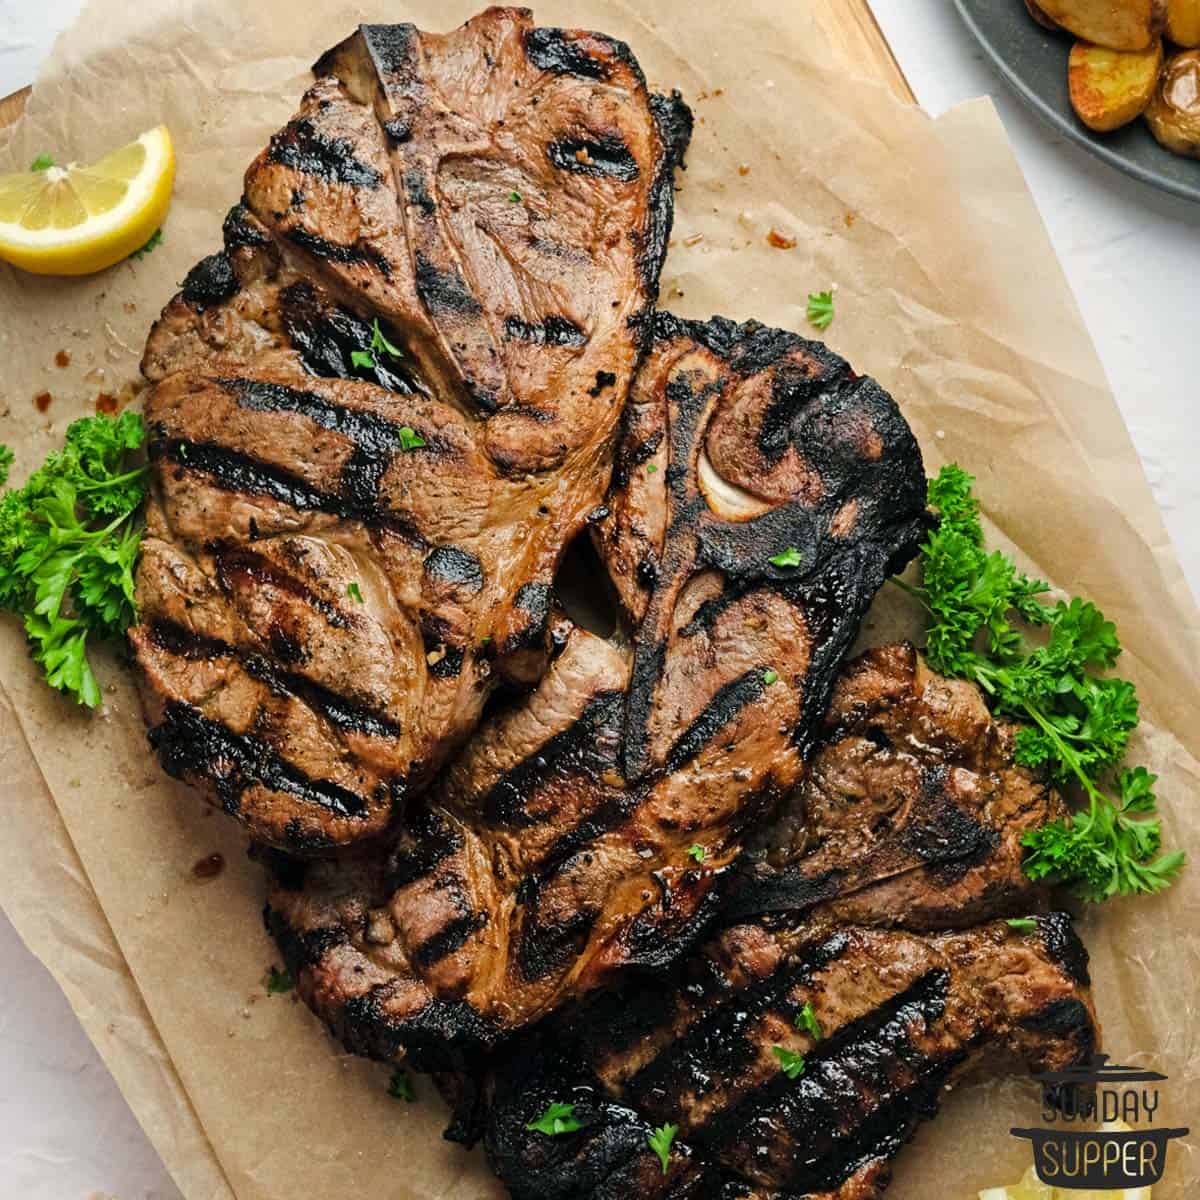 three grilled pork steaks on butcher paper with lemons and parsley